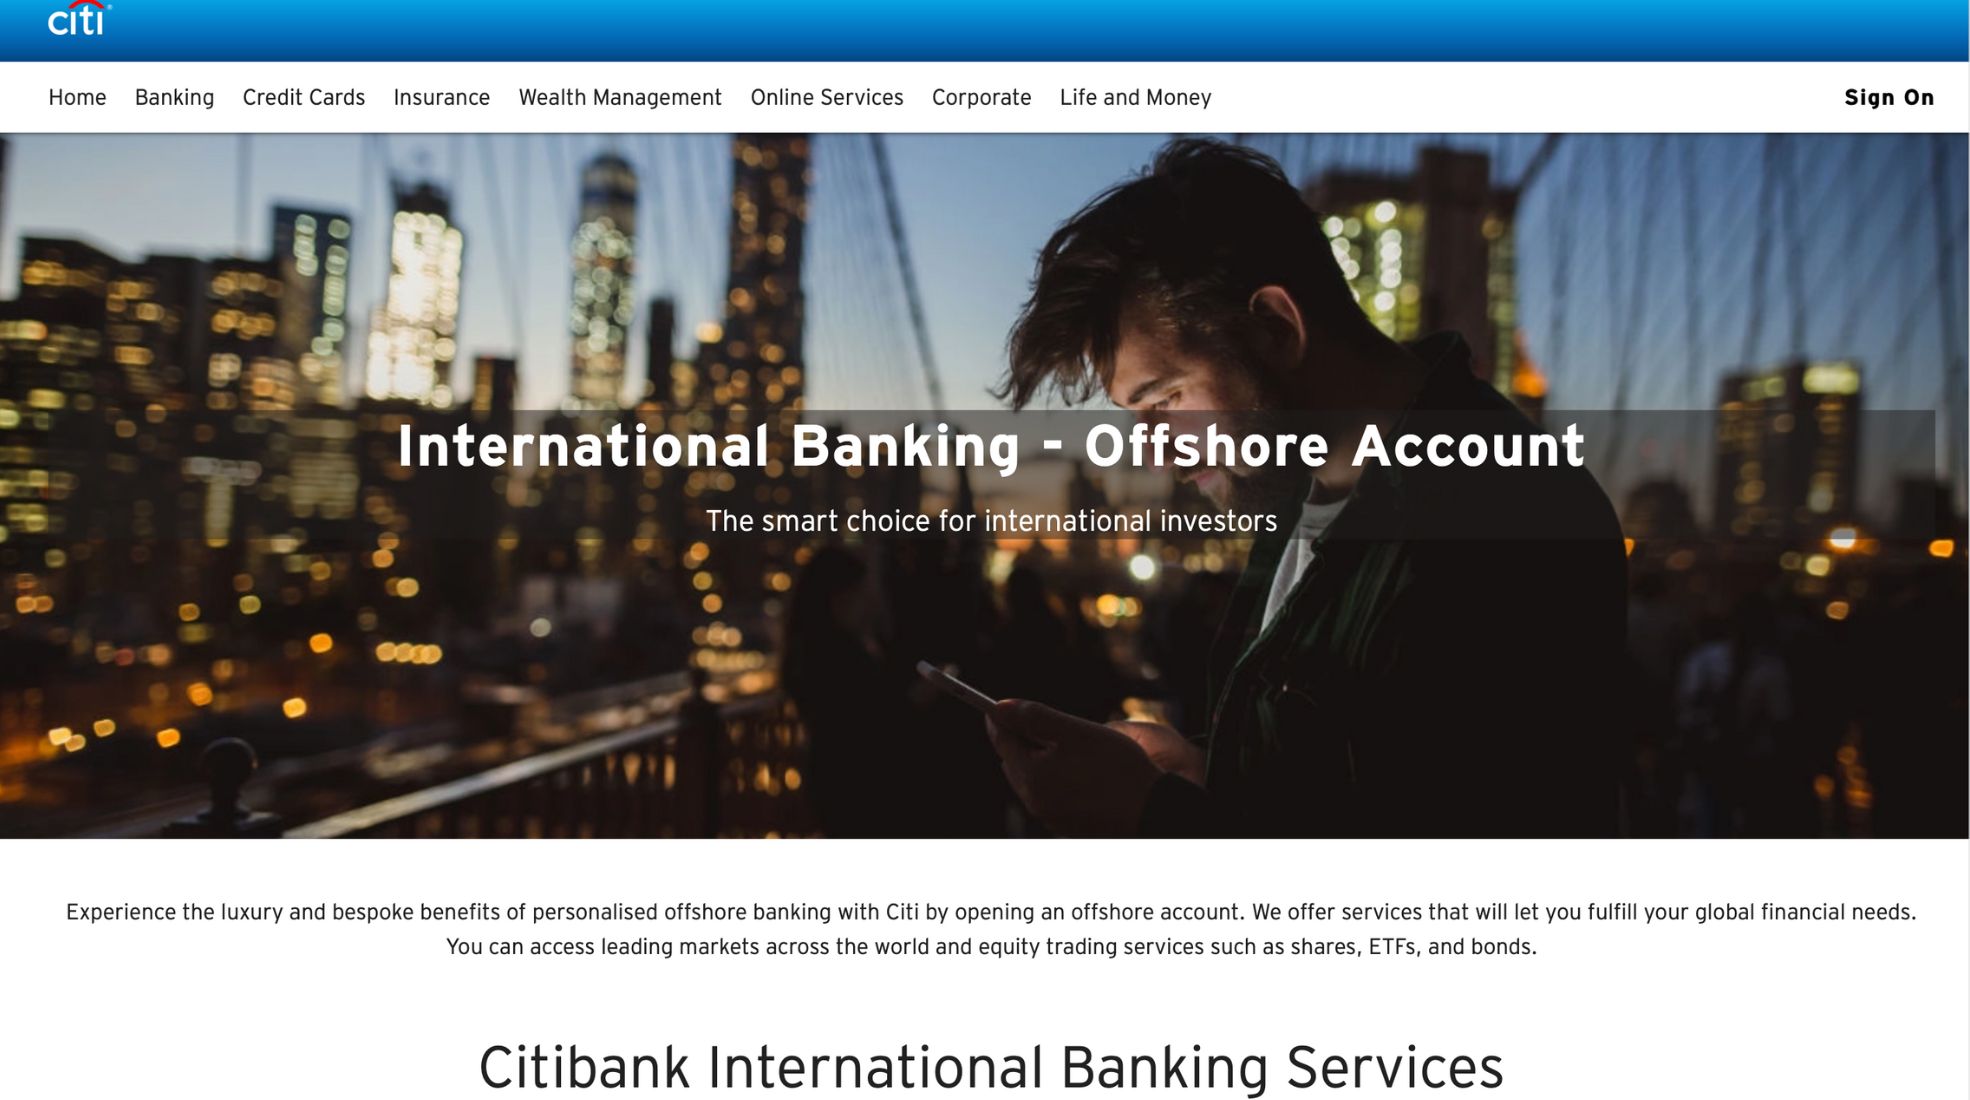 An image of the Citibank website, which is an International bank in Dubai.